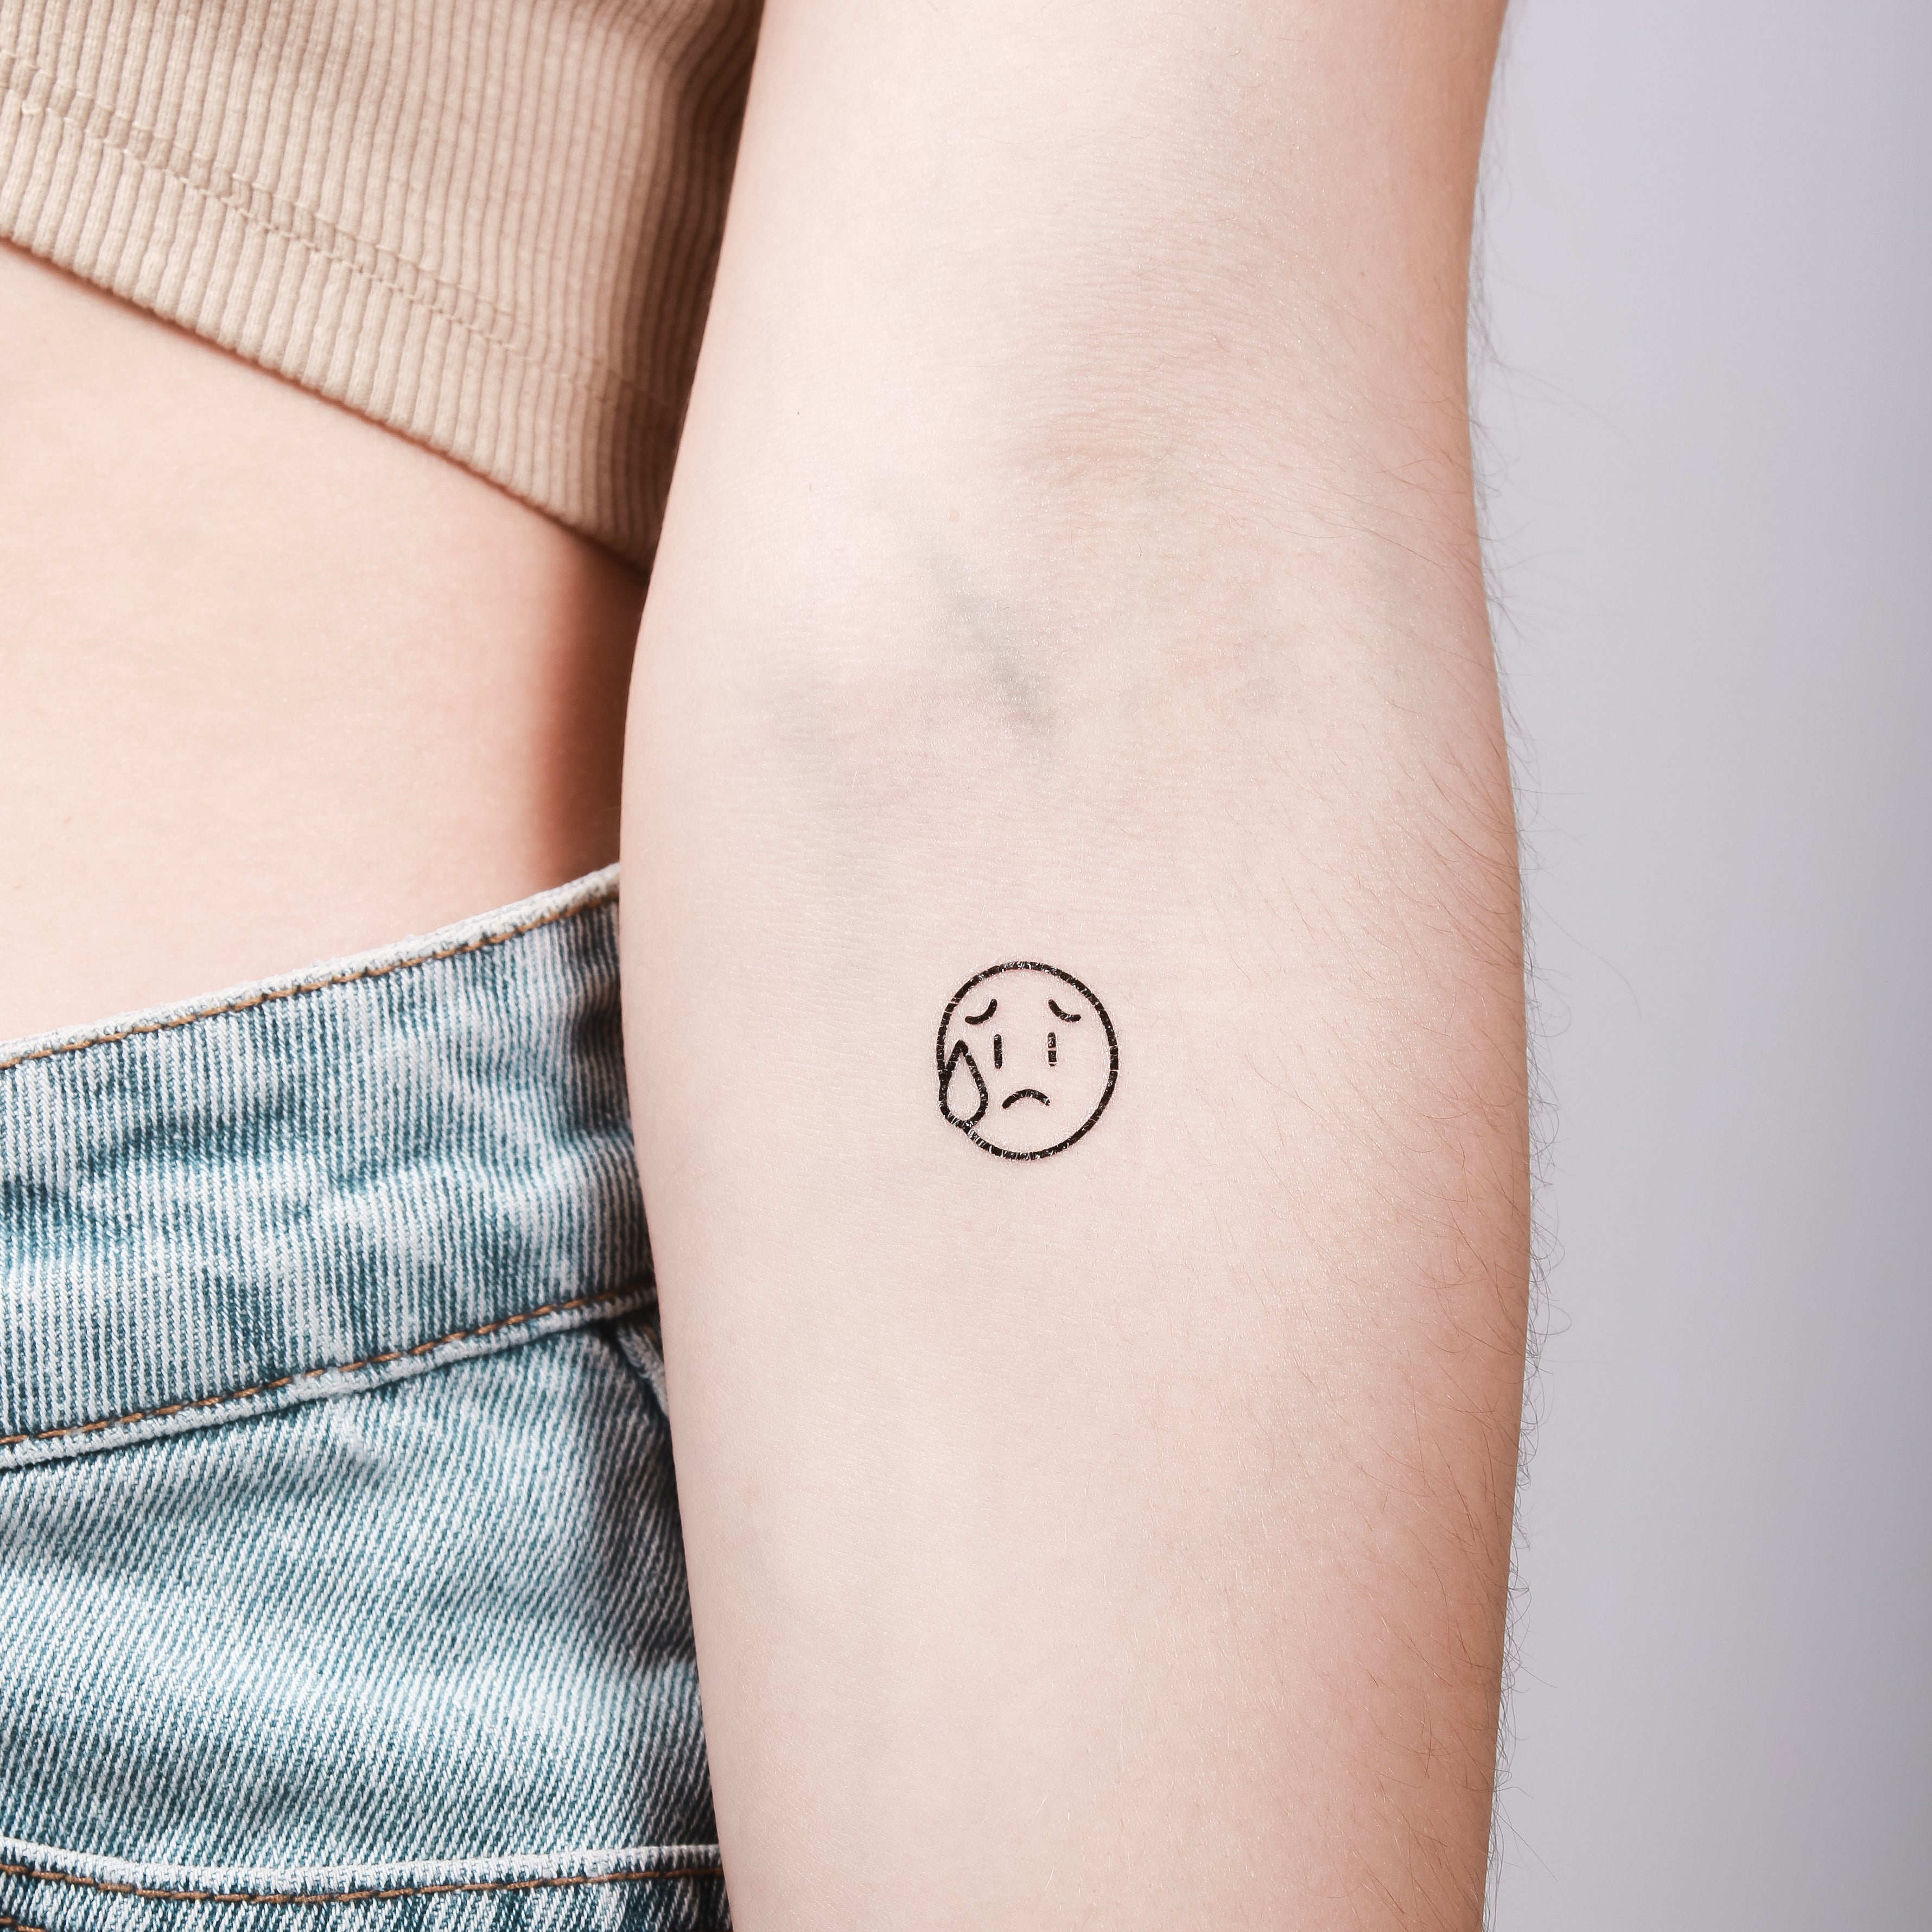 The Happiest Smiley Face Tattoo Ideas - TattooGlee | Smiley face tattoo,  Smile face tattoo, Face tattoo